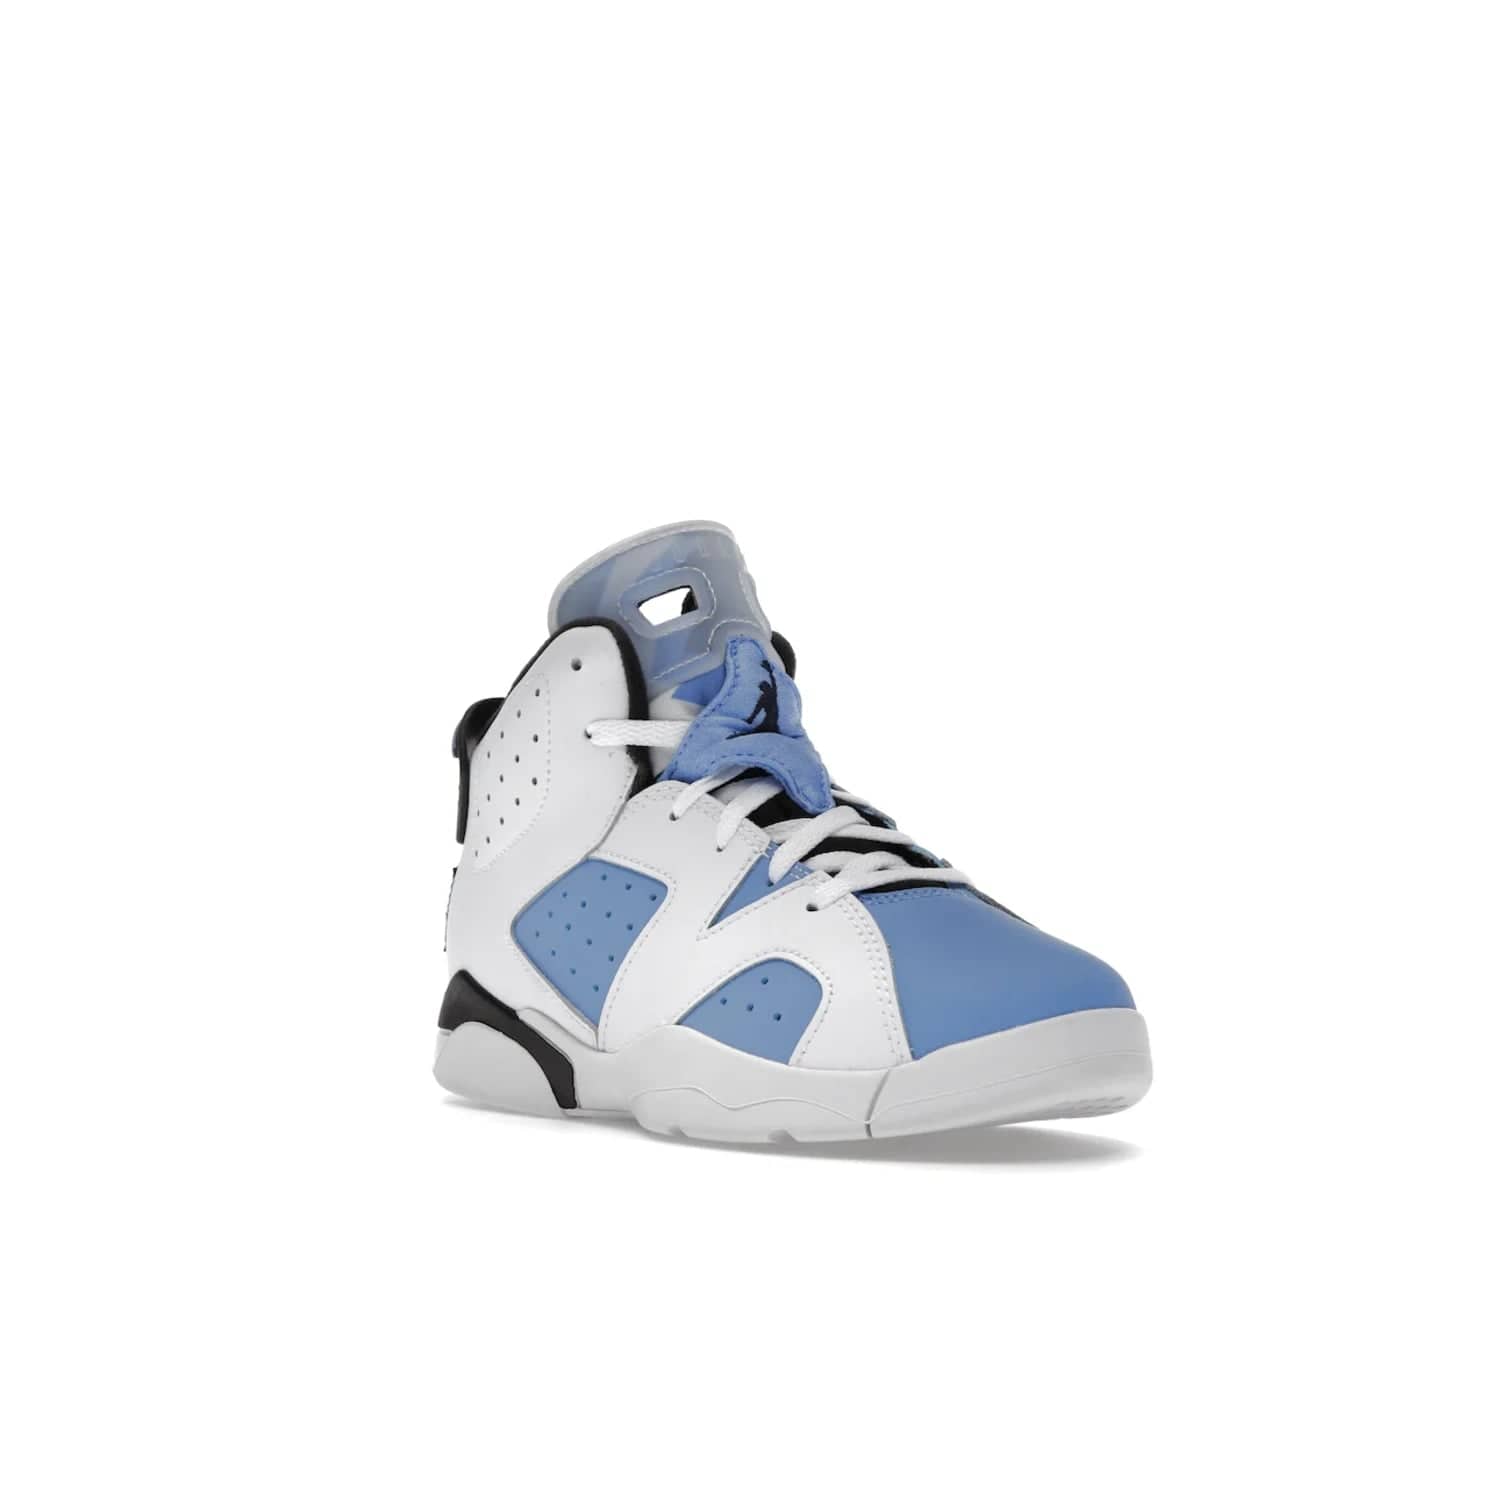 Jordan 6 Retro UNC White (PS) - Image 6 - Only at www.BallersClubKickz.com - The Air Jordan 6 Retro UNC White PS celebrates Michael Jordan's alma mater, the University of North Carolina. It features a classic color-blocking of the iconic Jordan 6 Carmine and a stitched Jordan Team patch. This must-have sneaker released on April 27th, 2022. Referencing the university colors, get this shoe for a stylish and timeless style with university pride.